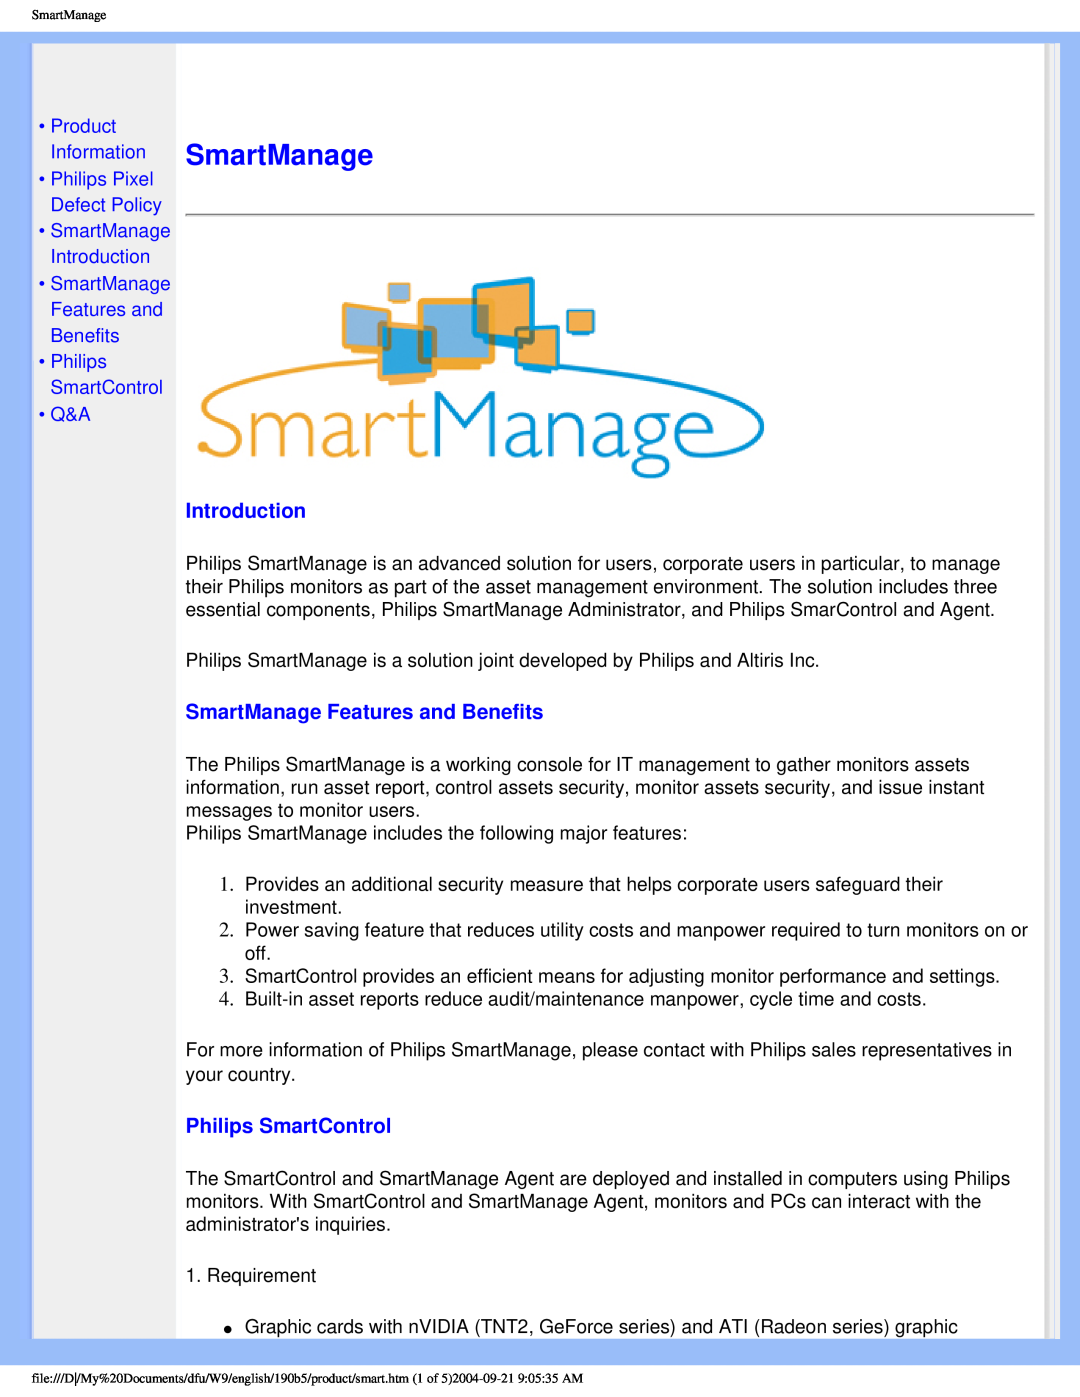 Philips 190b5 user manual Introduction, SmartManage Features and Benefits, Philips SmartControl Q&A 